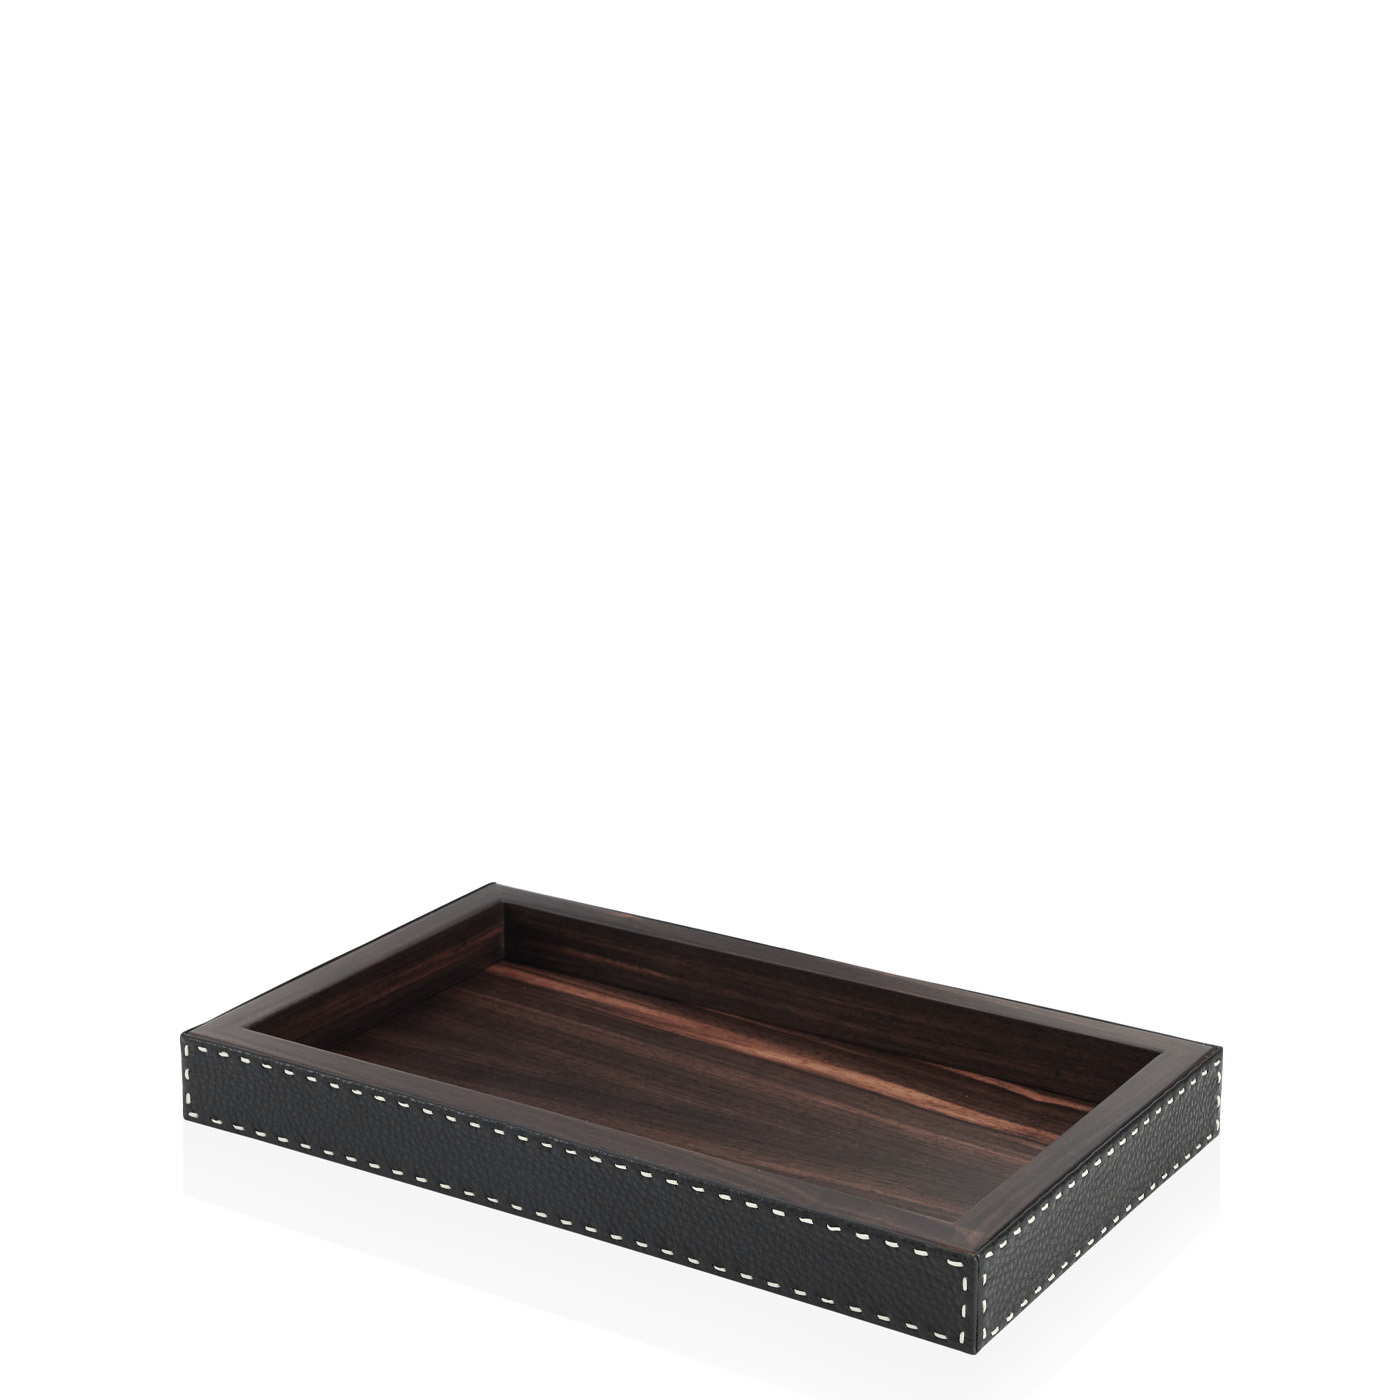 Bath accessories - Berenice tray in horn and Onyx colour leather 4497 - Arcahorn